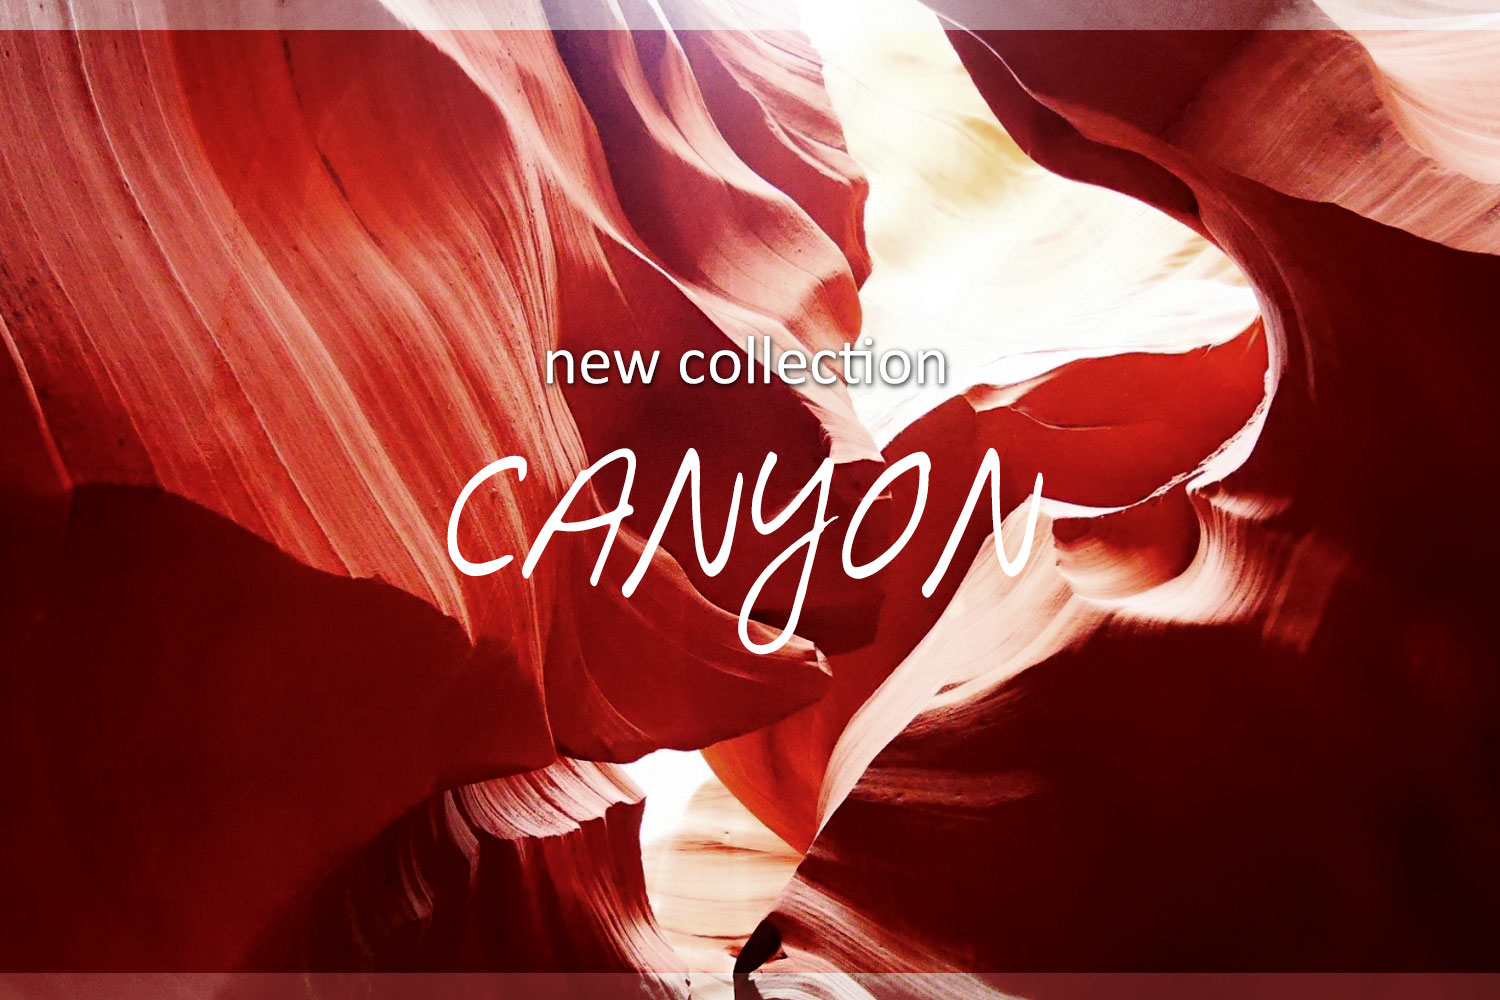 【New Collection】CANYON - キャニオン -